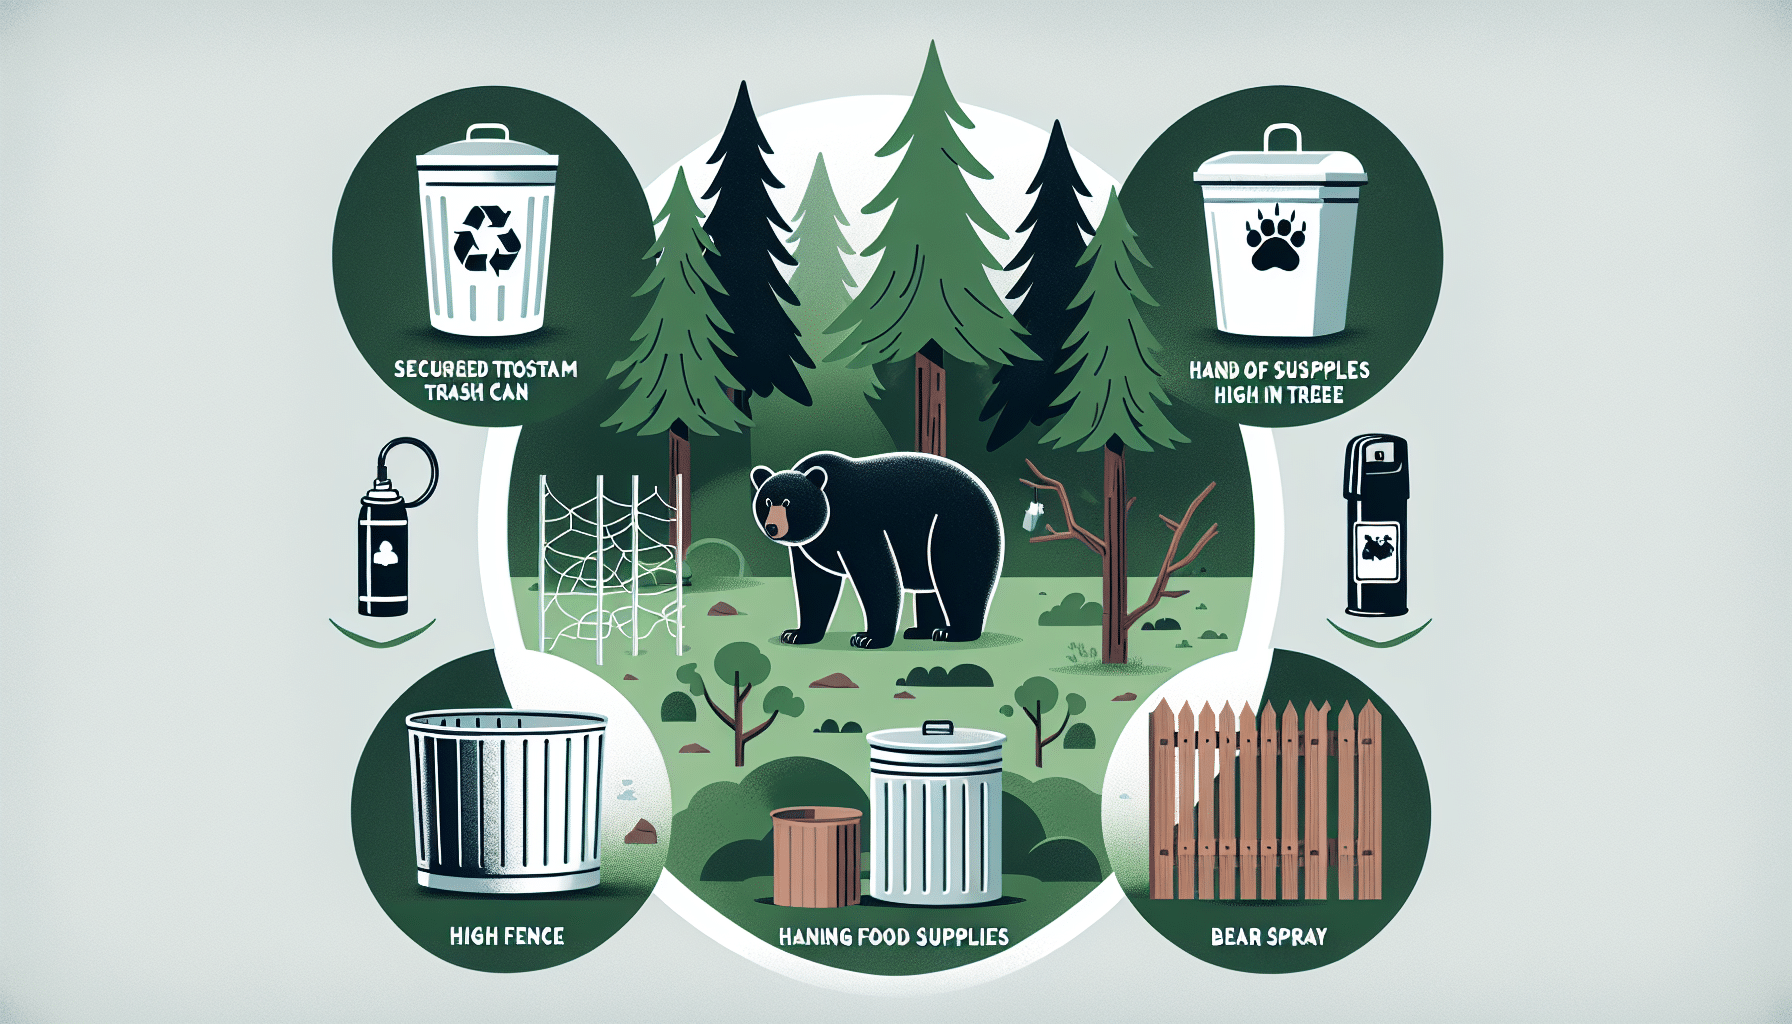 An image showing a forest area with a prominent black bear in the mid-ground. Around the scene, there are visual elements representing typical bear deterrent techniques such as a secured trash can, high fence, bear-resistant food storage containers, hanging food supplies high in a tree, and bear spray. None of these items or the environment should contain any text or brand logos.